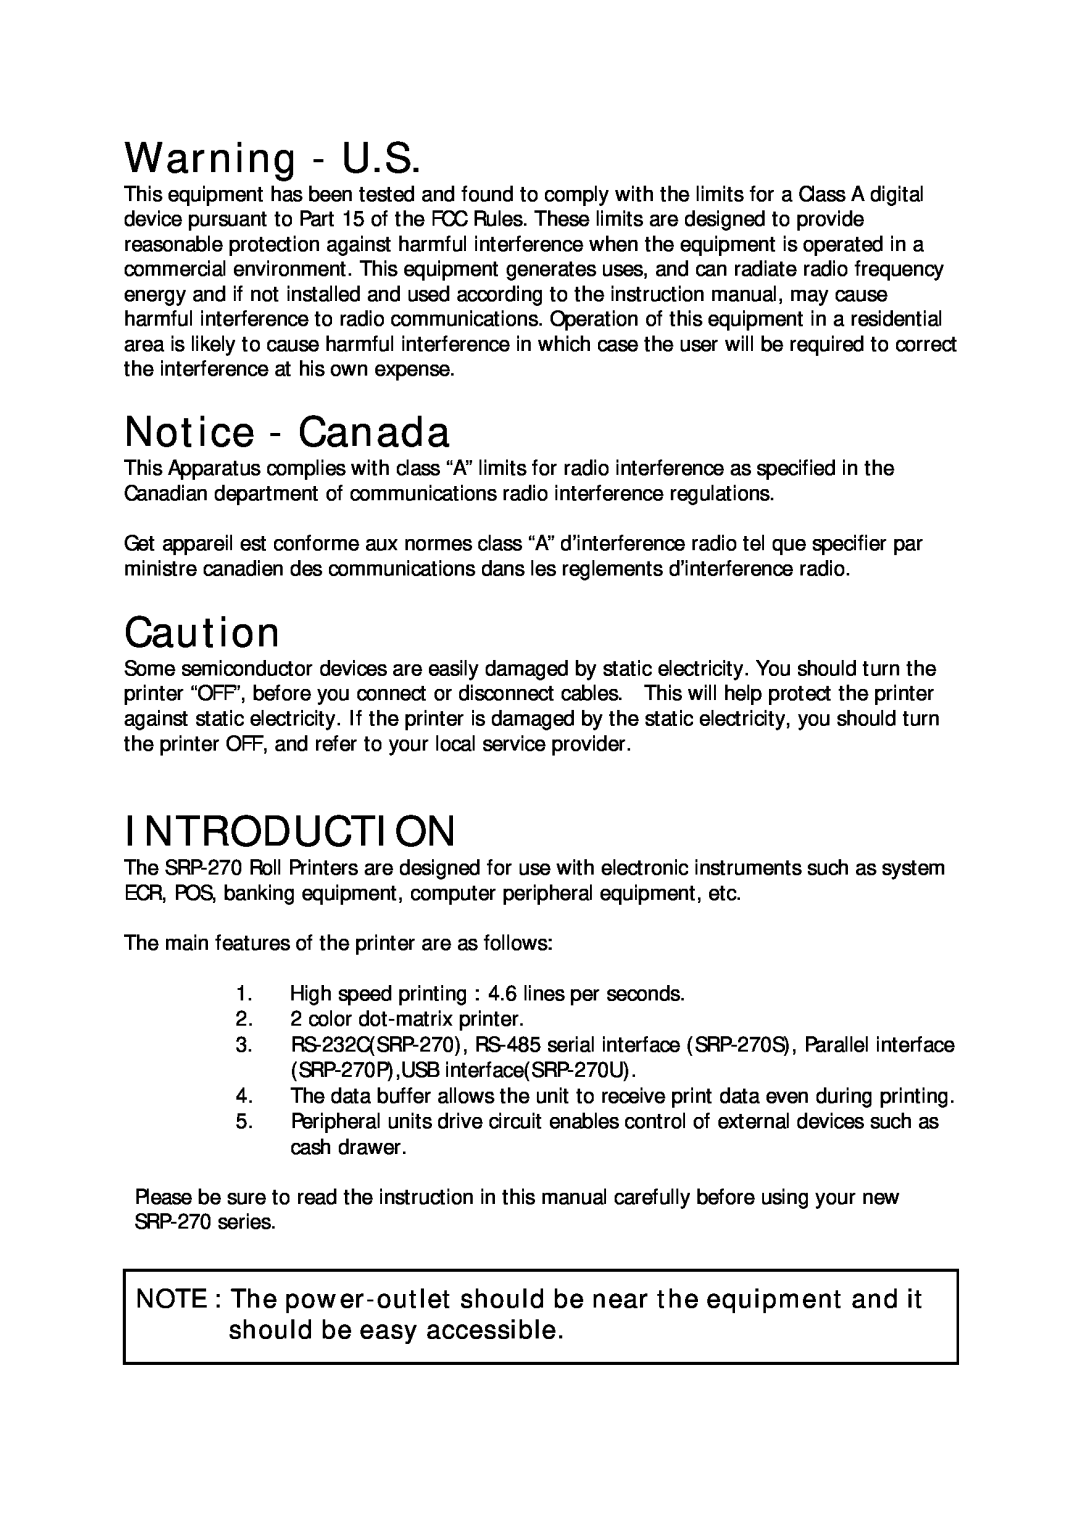 Sanyo SRP-270 specifications Warning - U.S, Notice - Canada, Introduction 